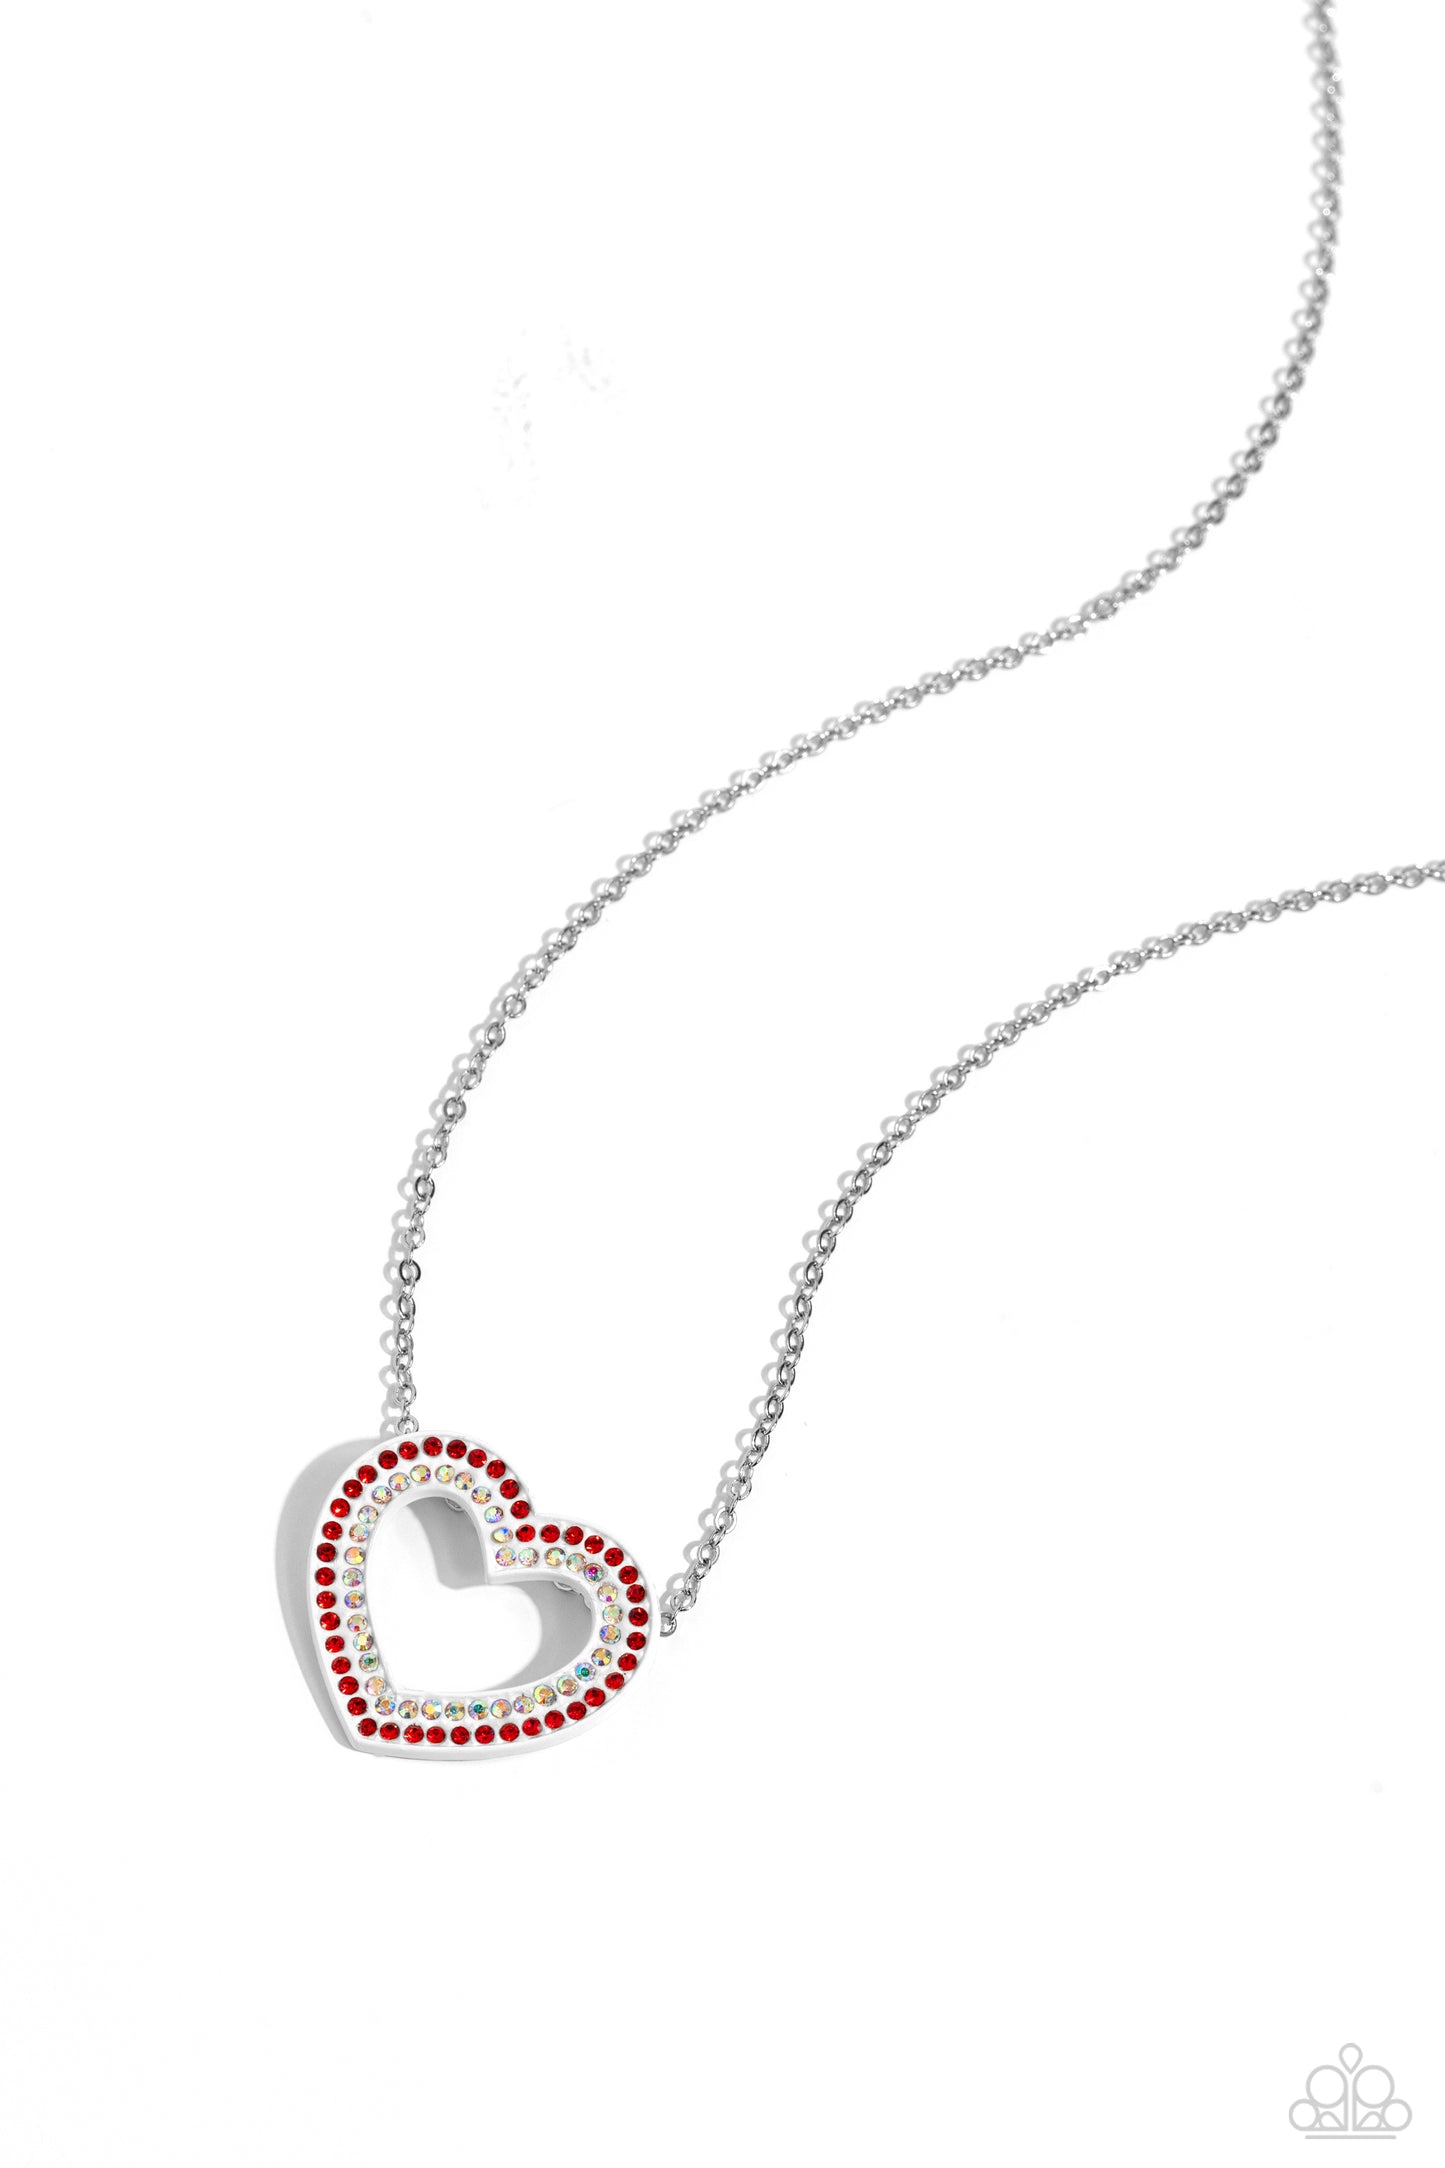 Hyper Heartland Multi Heart Necklace - Paparazzi Accessories  Two rows of glassy red and iridescent rhinestones are encrusted along the front of a white heart frame that glides along a dainty silver chain, creating a flirty centerpiece. Features an adjustable clasp closure. Due to its prismatic palette, color may vary.  Sold as one individual necklace. Includes one pair of matching earrings.  SKU: P2RE-MTXX-232XX